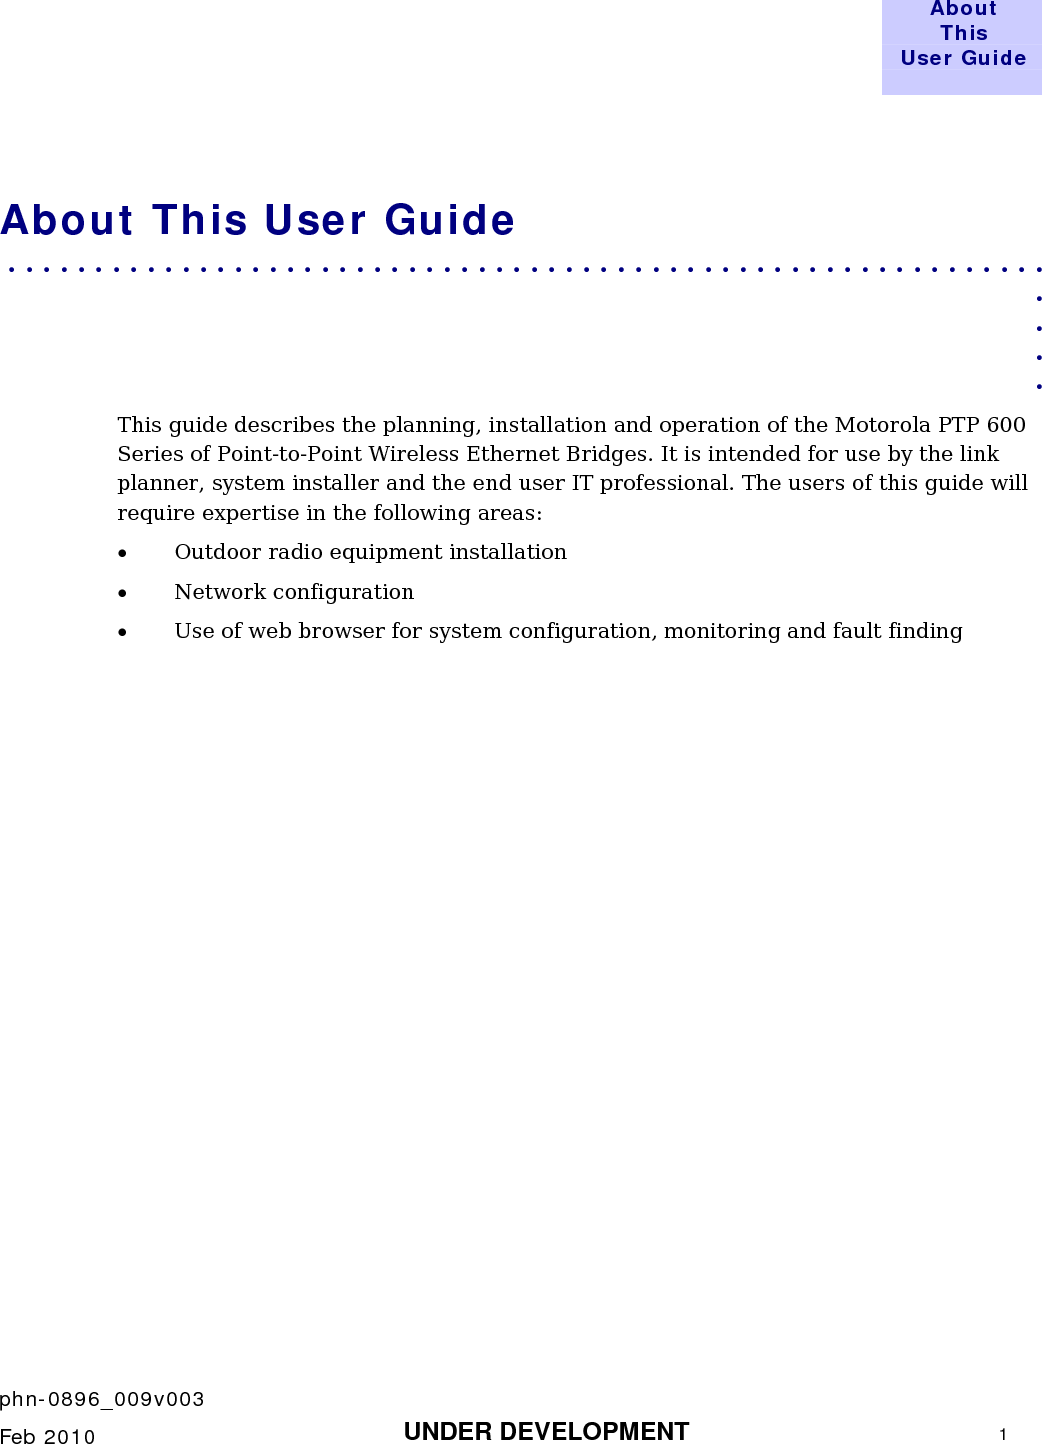  About This User Guide     phn-0896_009v003    Feb 2010  UNDER DEVELOPMENT  1  About This User Guide . . . . . . . . . . . . . . . . . . . . . . . . . . . . . . . . . . . . . . . . . . . . . . . . . . . . . . . . . . . .  . . . . This guide describes the planning, installation and operation of the Motorola PTP 600 Series of Point-to-Point Wireless Ethernet Bridges. It is intended for use by the link planner, system installer and the end user IT professional. The users of this guide will require expertise in the following areas: • Outdoor radio equipment installation • Network configuration • Use of web browser for system configuration, monitoring and fault finding     